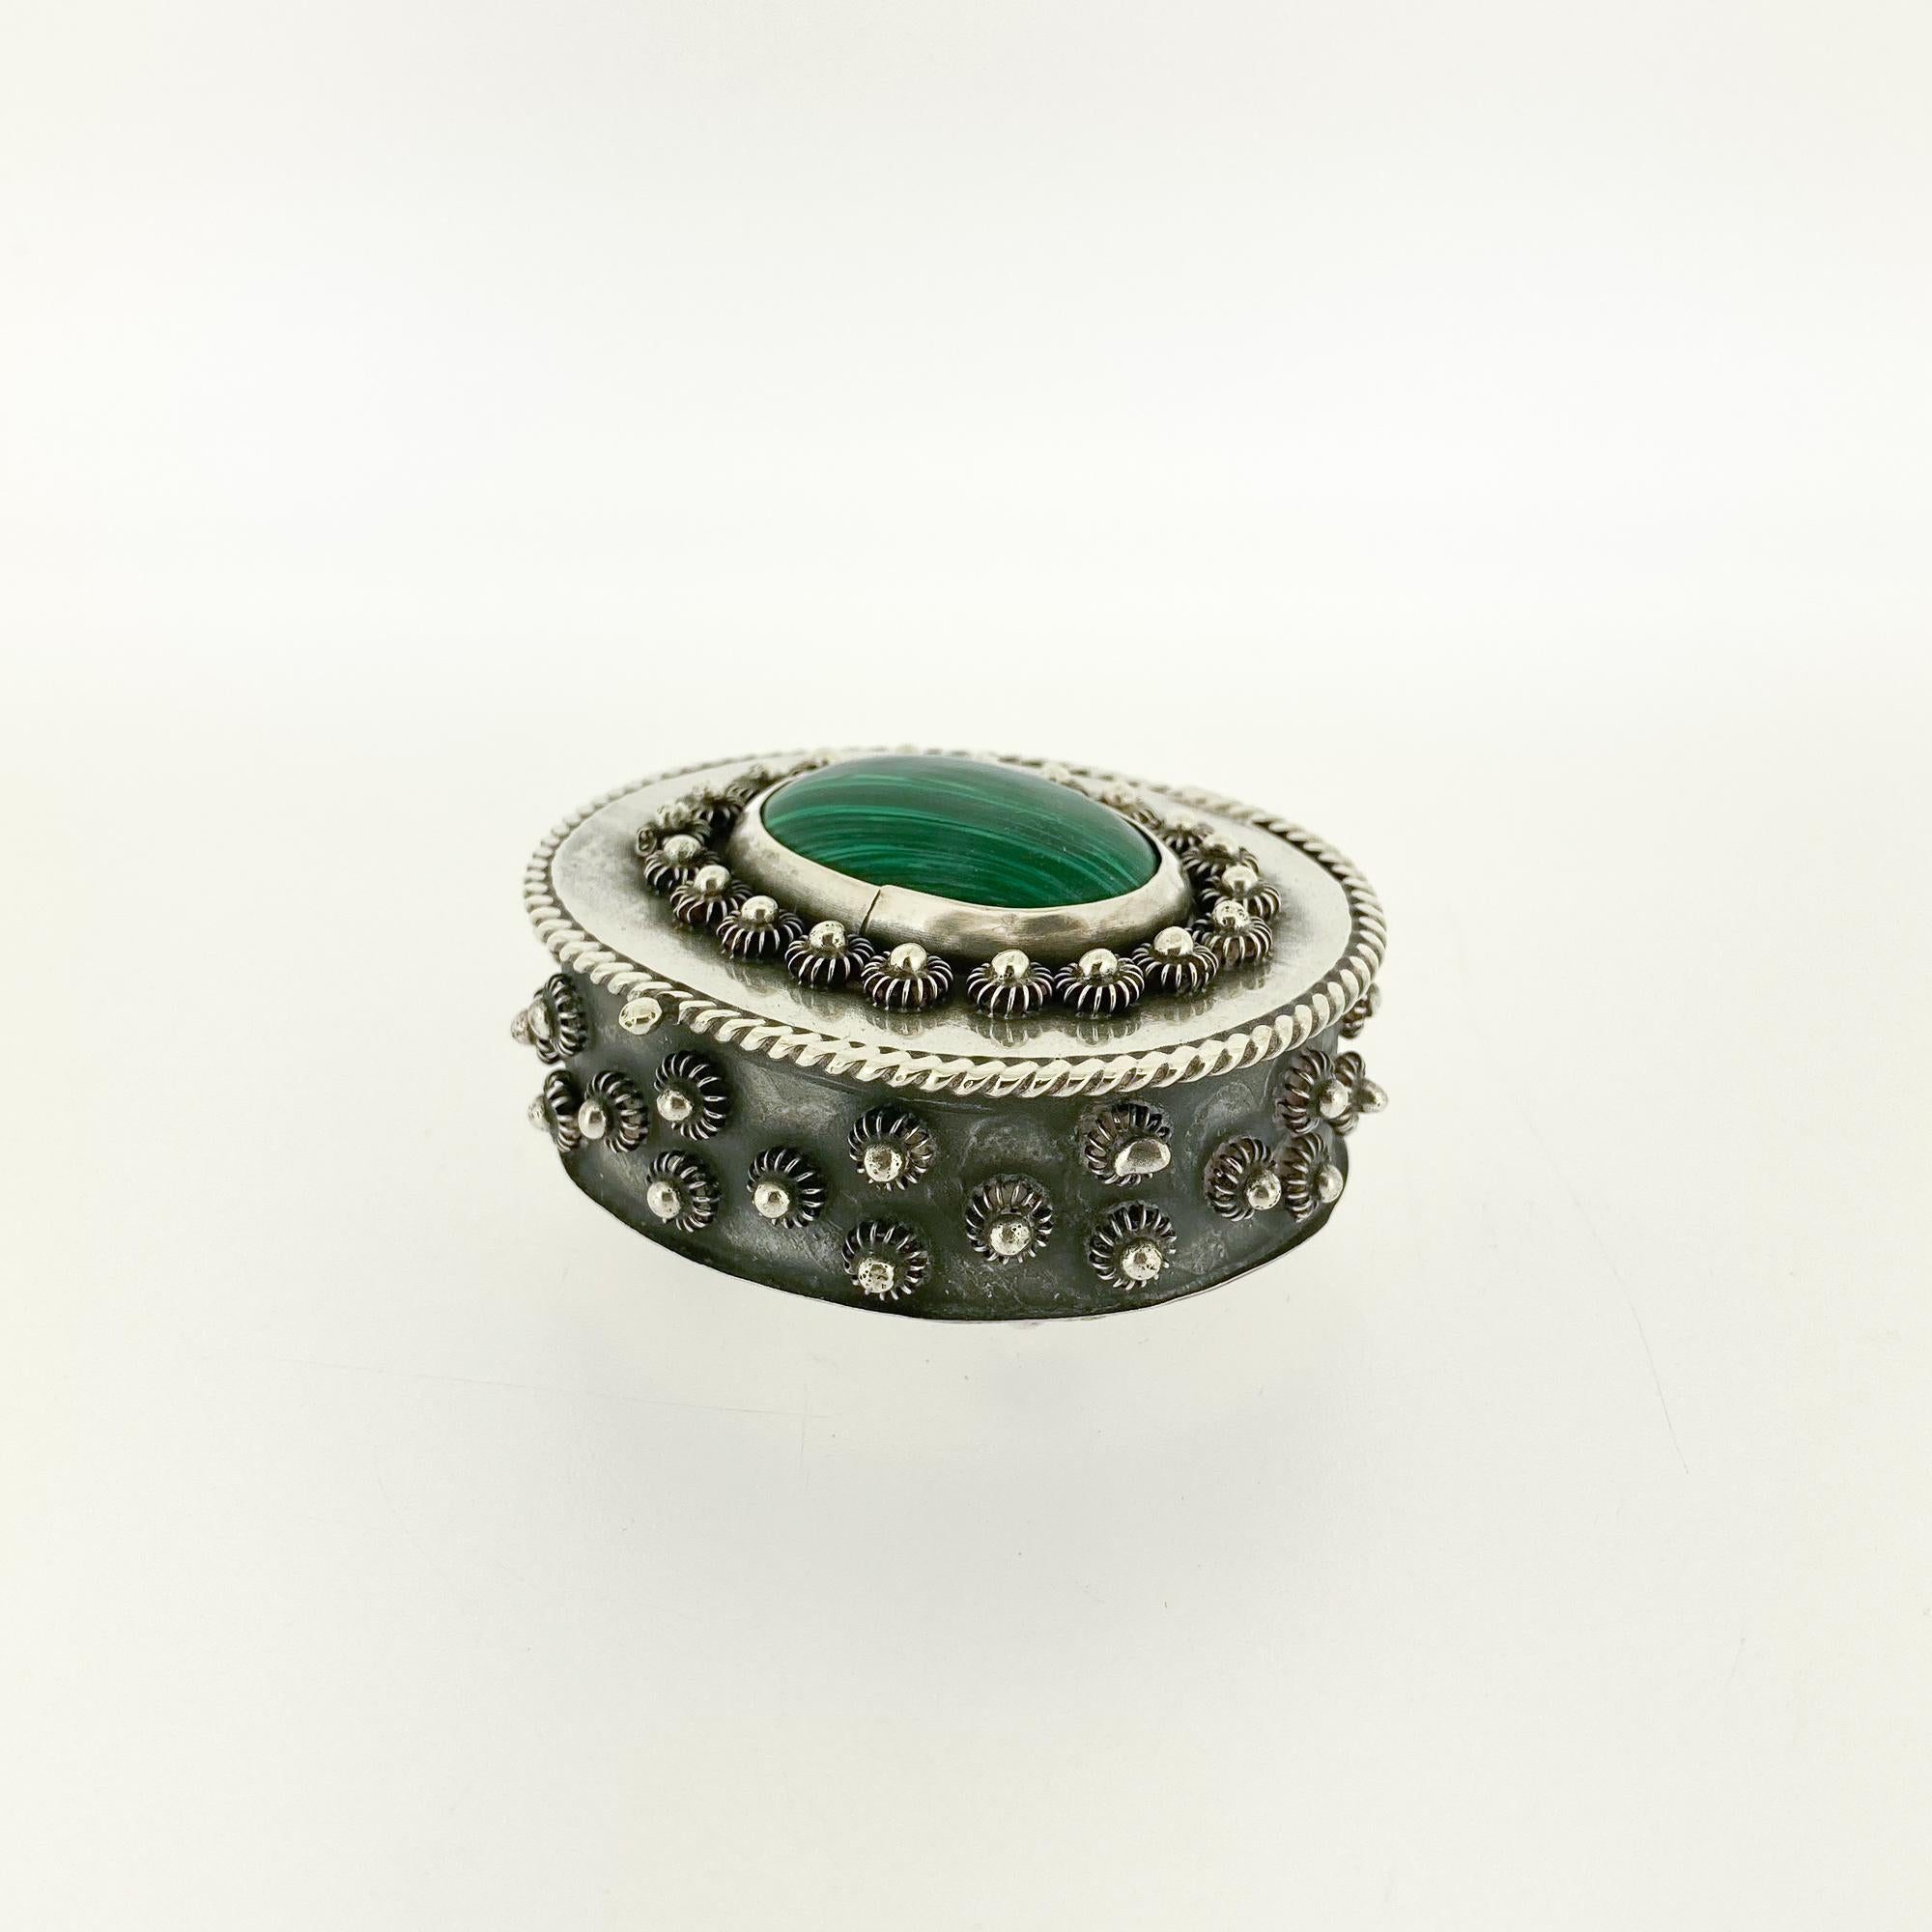 A fine Mexican sterling silver box.

With a malachite cabochon to the lid surrounded by silver knops. 

The rim of the lid is braided, and the side of the body is decorated with knops throughout.

The box stands on 4 small knop shaped feet.

Marked